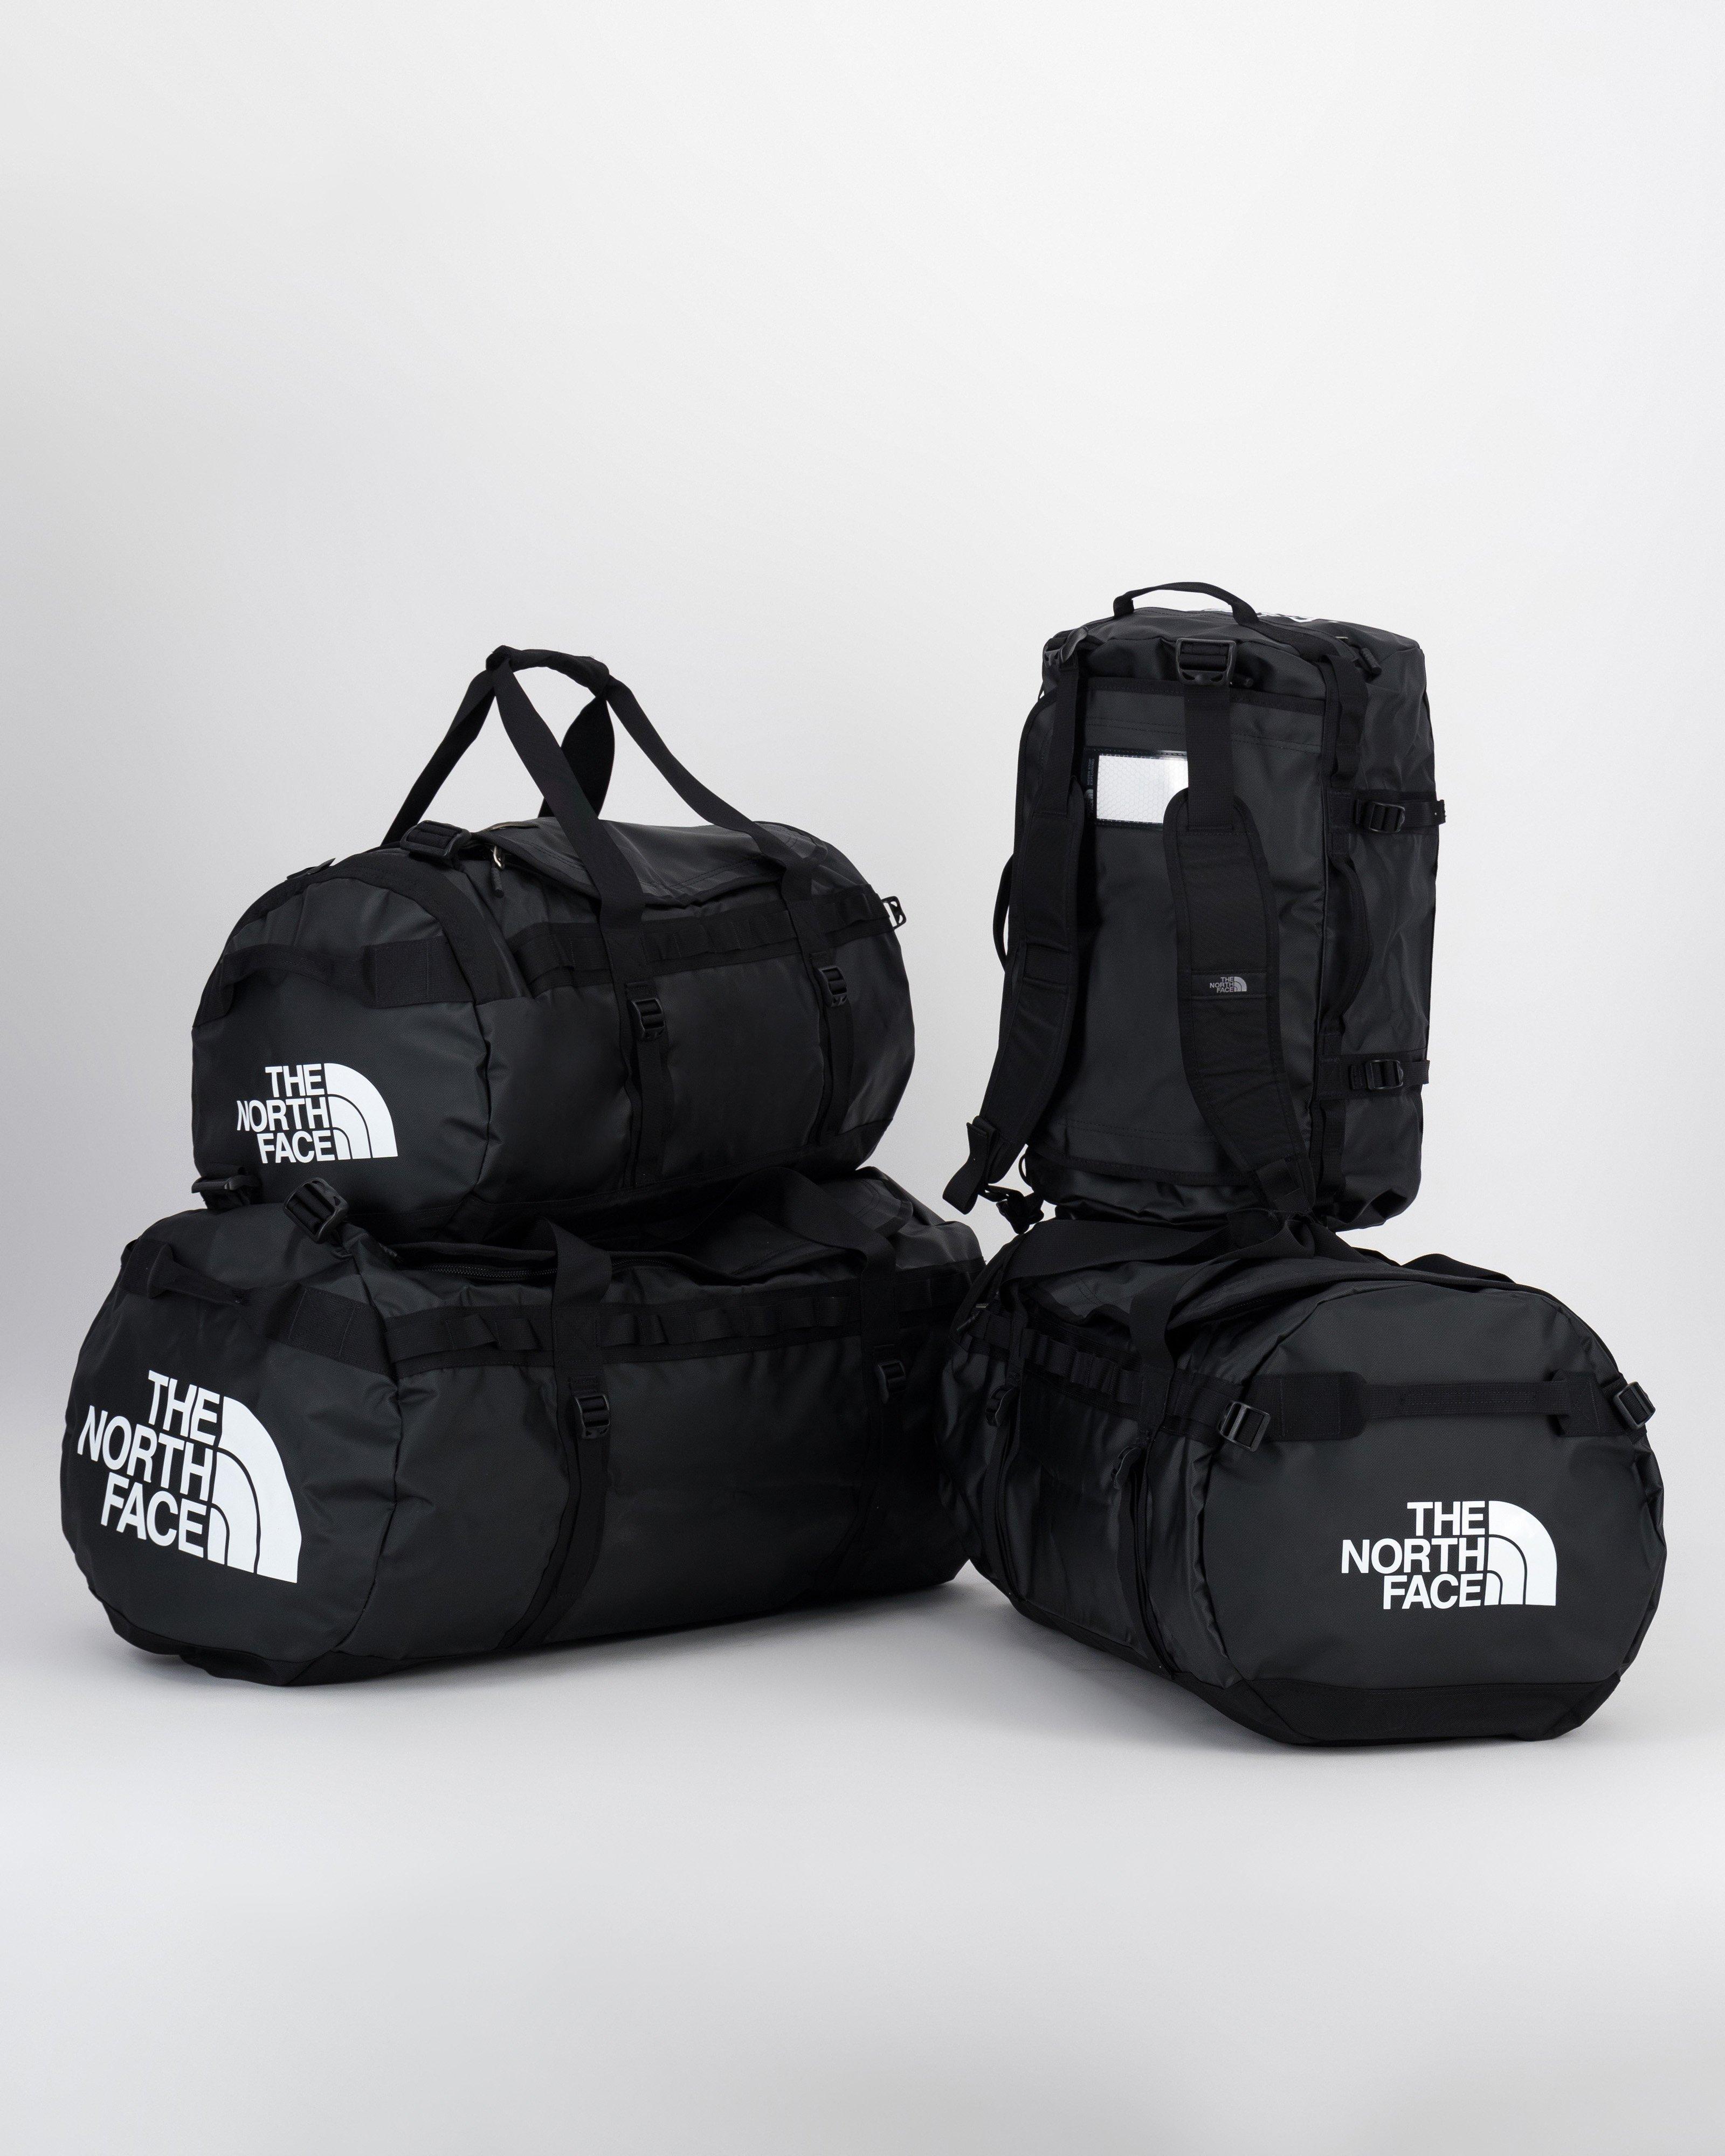 The North Face Small Base Camp Duffel Bag -  Black